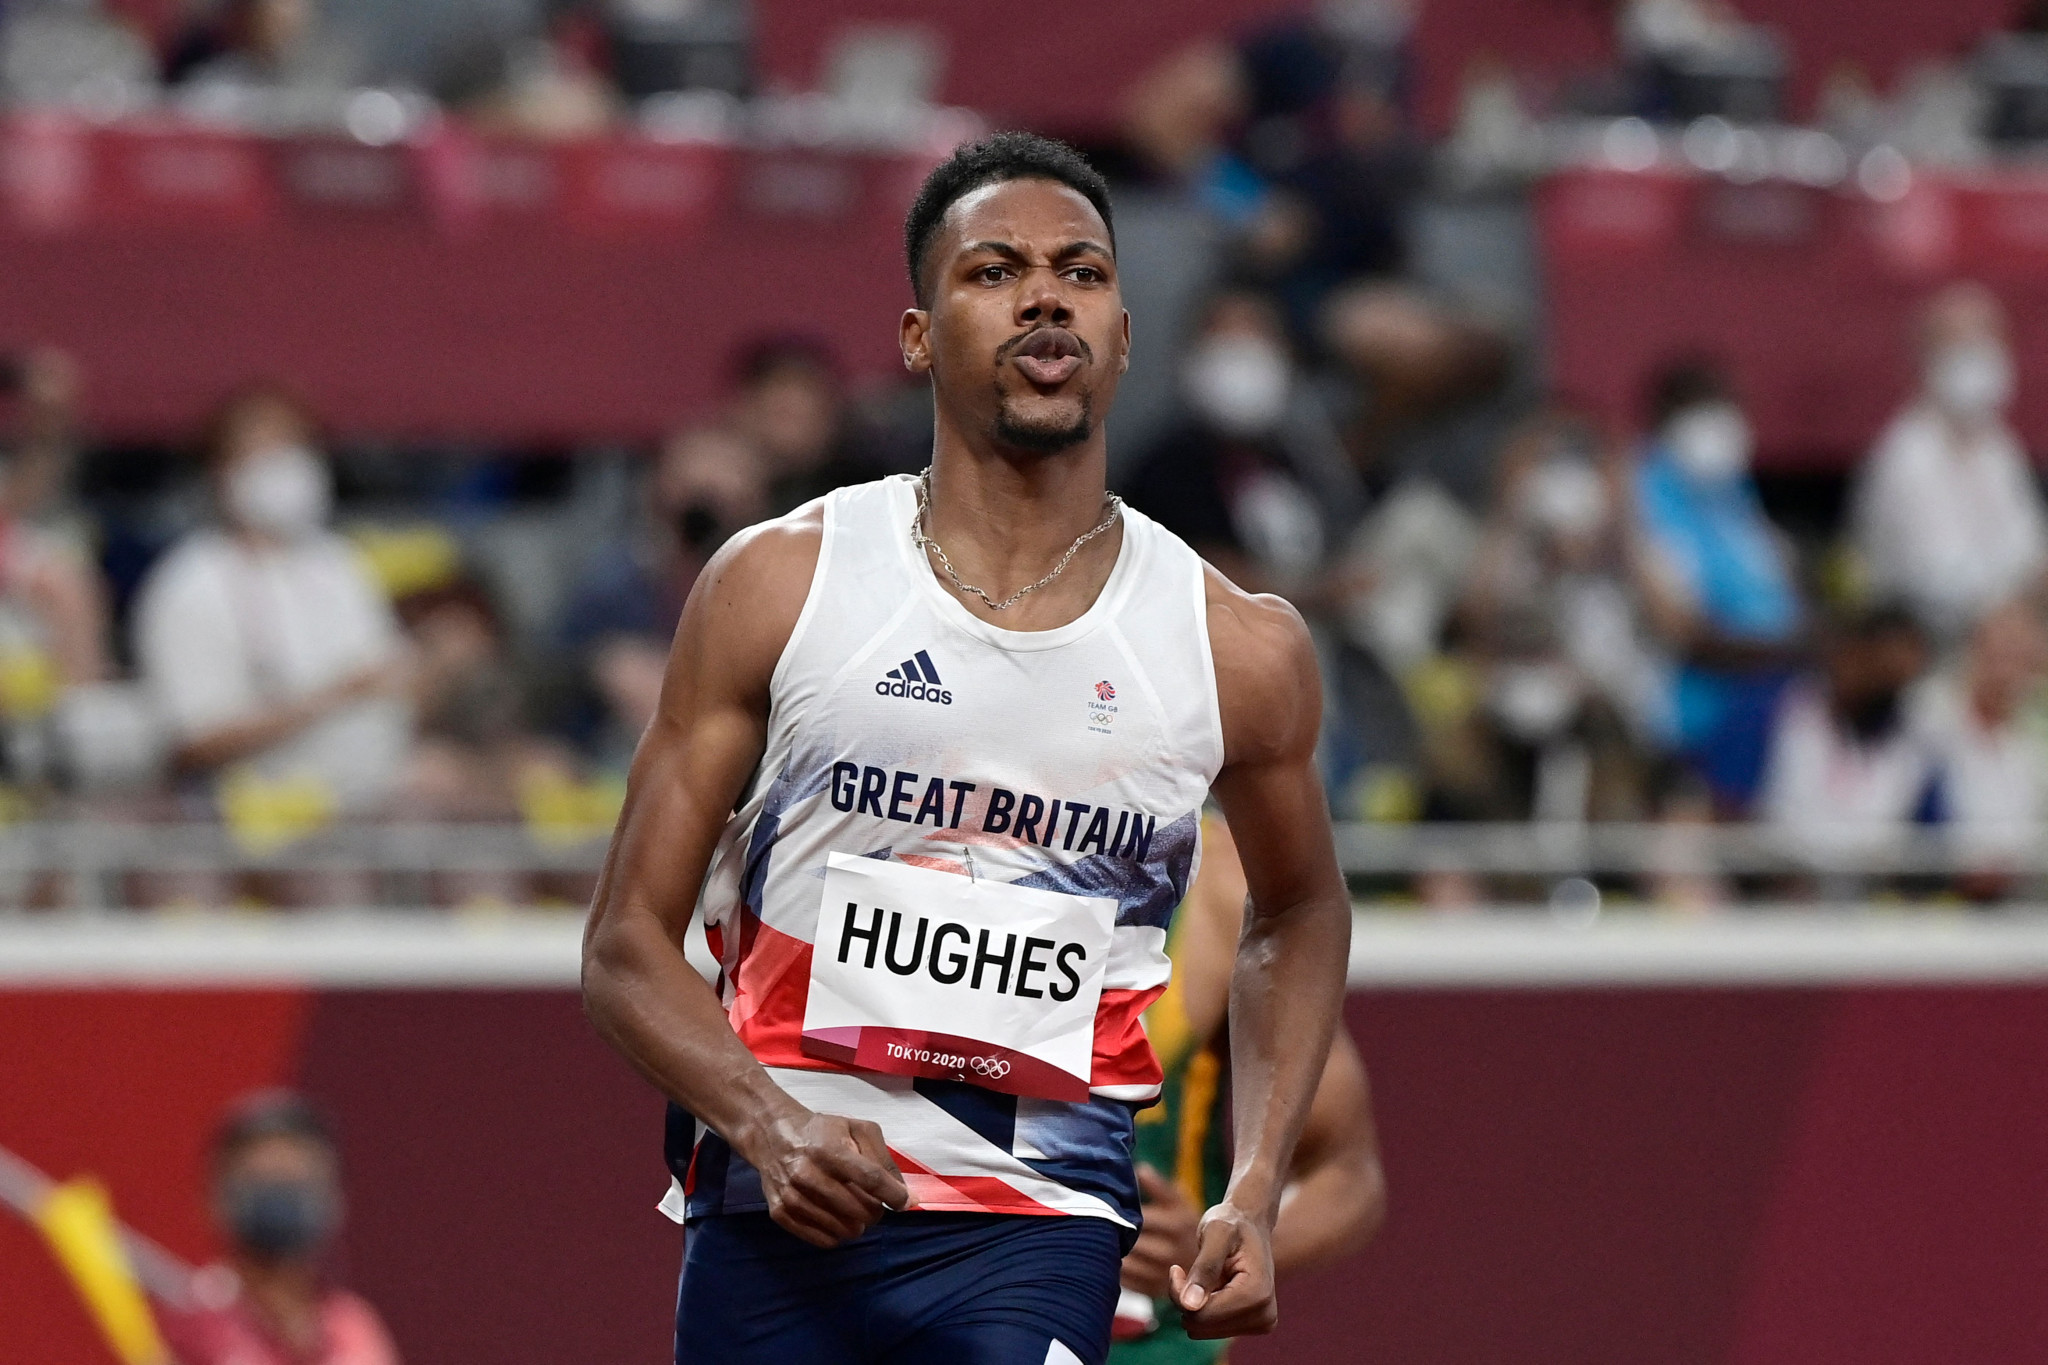 Anguilla's Zharnel Hughes reached the 100 metres final at the Tokyo 2020 Olympics in British colours, but was disqualified for a false start ©Getty Images